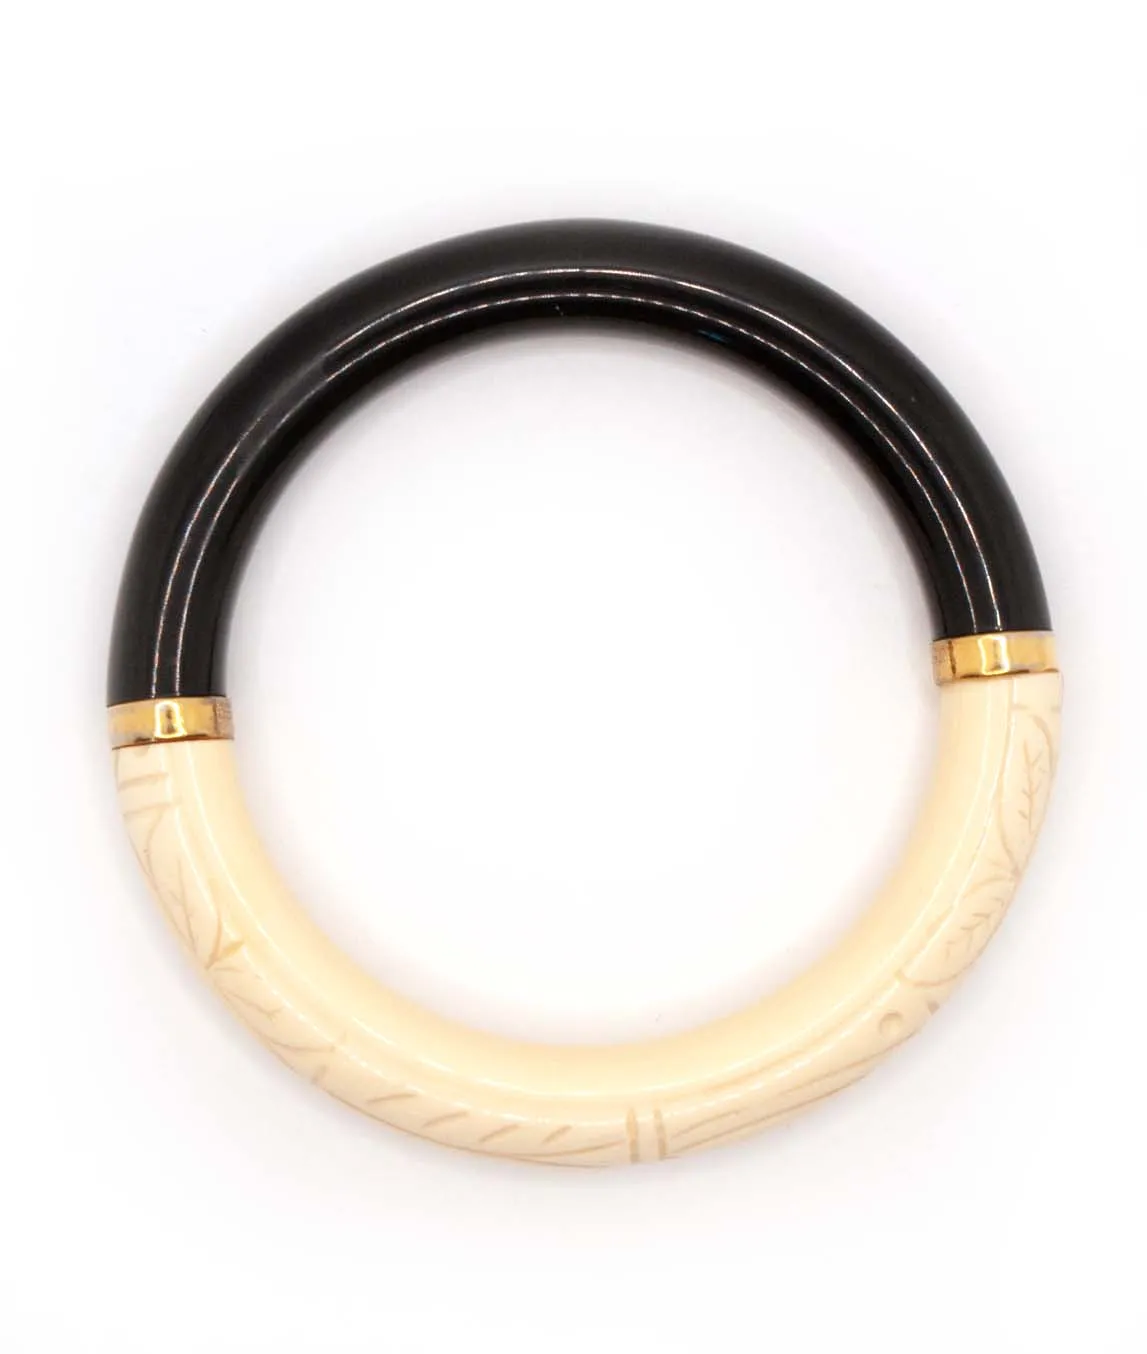 Top view of black and ivory Givenchy bangle